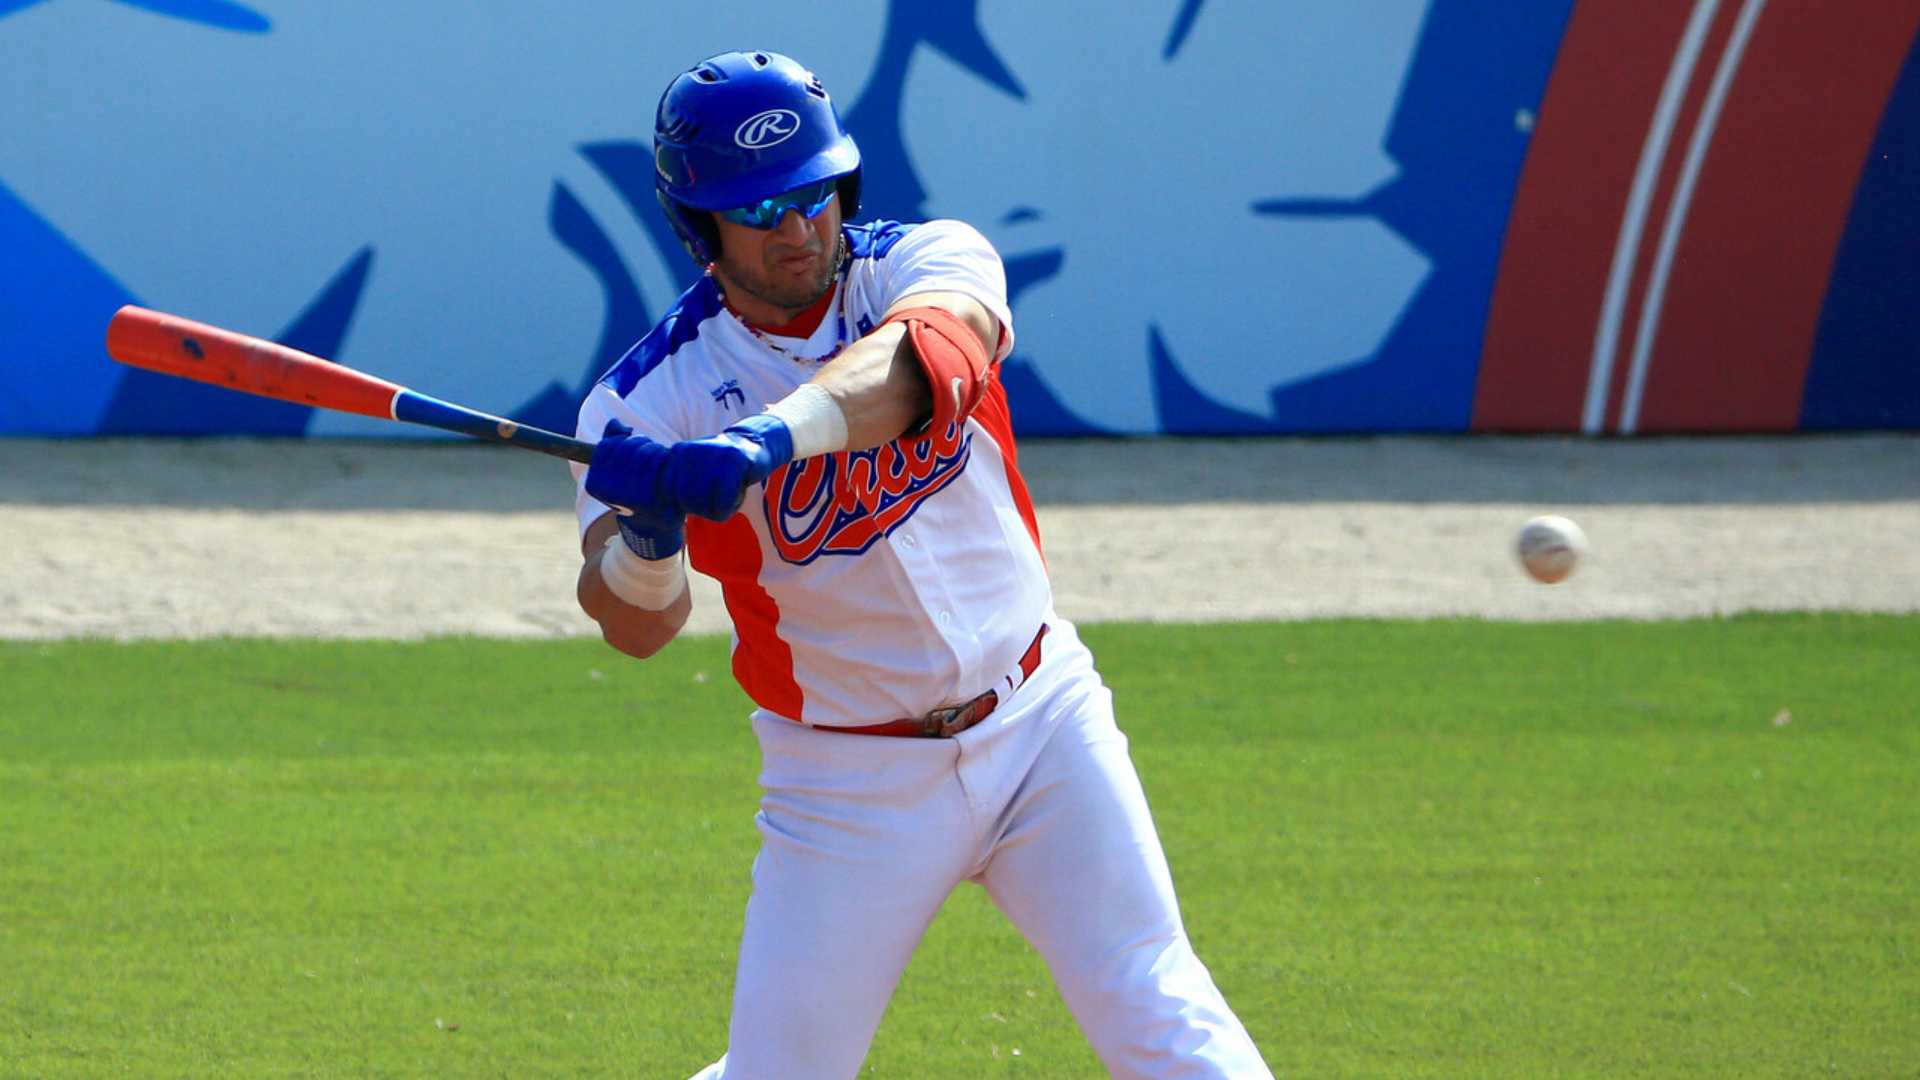 Chile Ends its Baseball Participation with a Loss to Venezuela